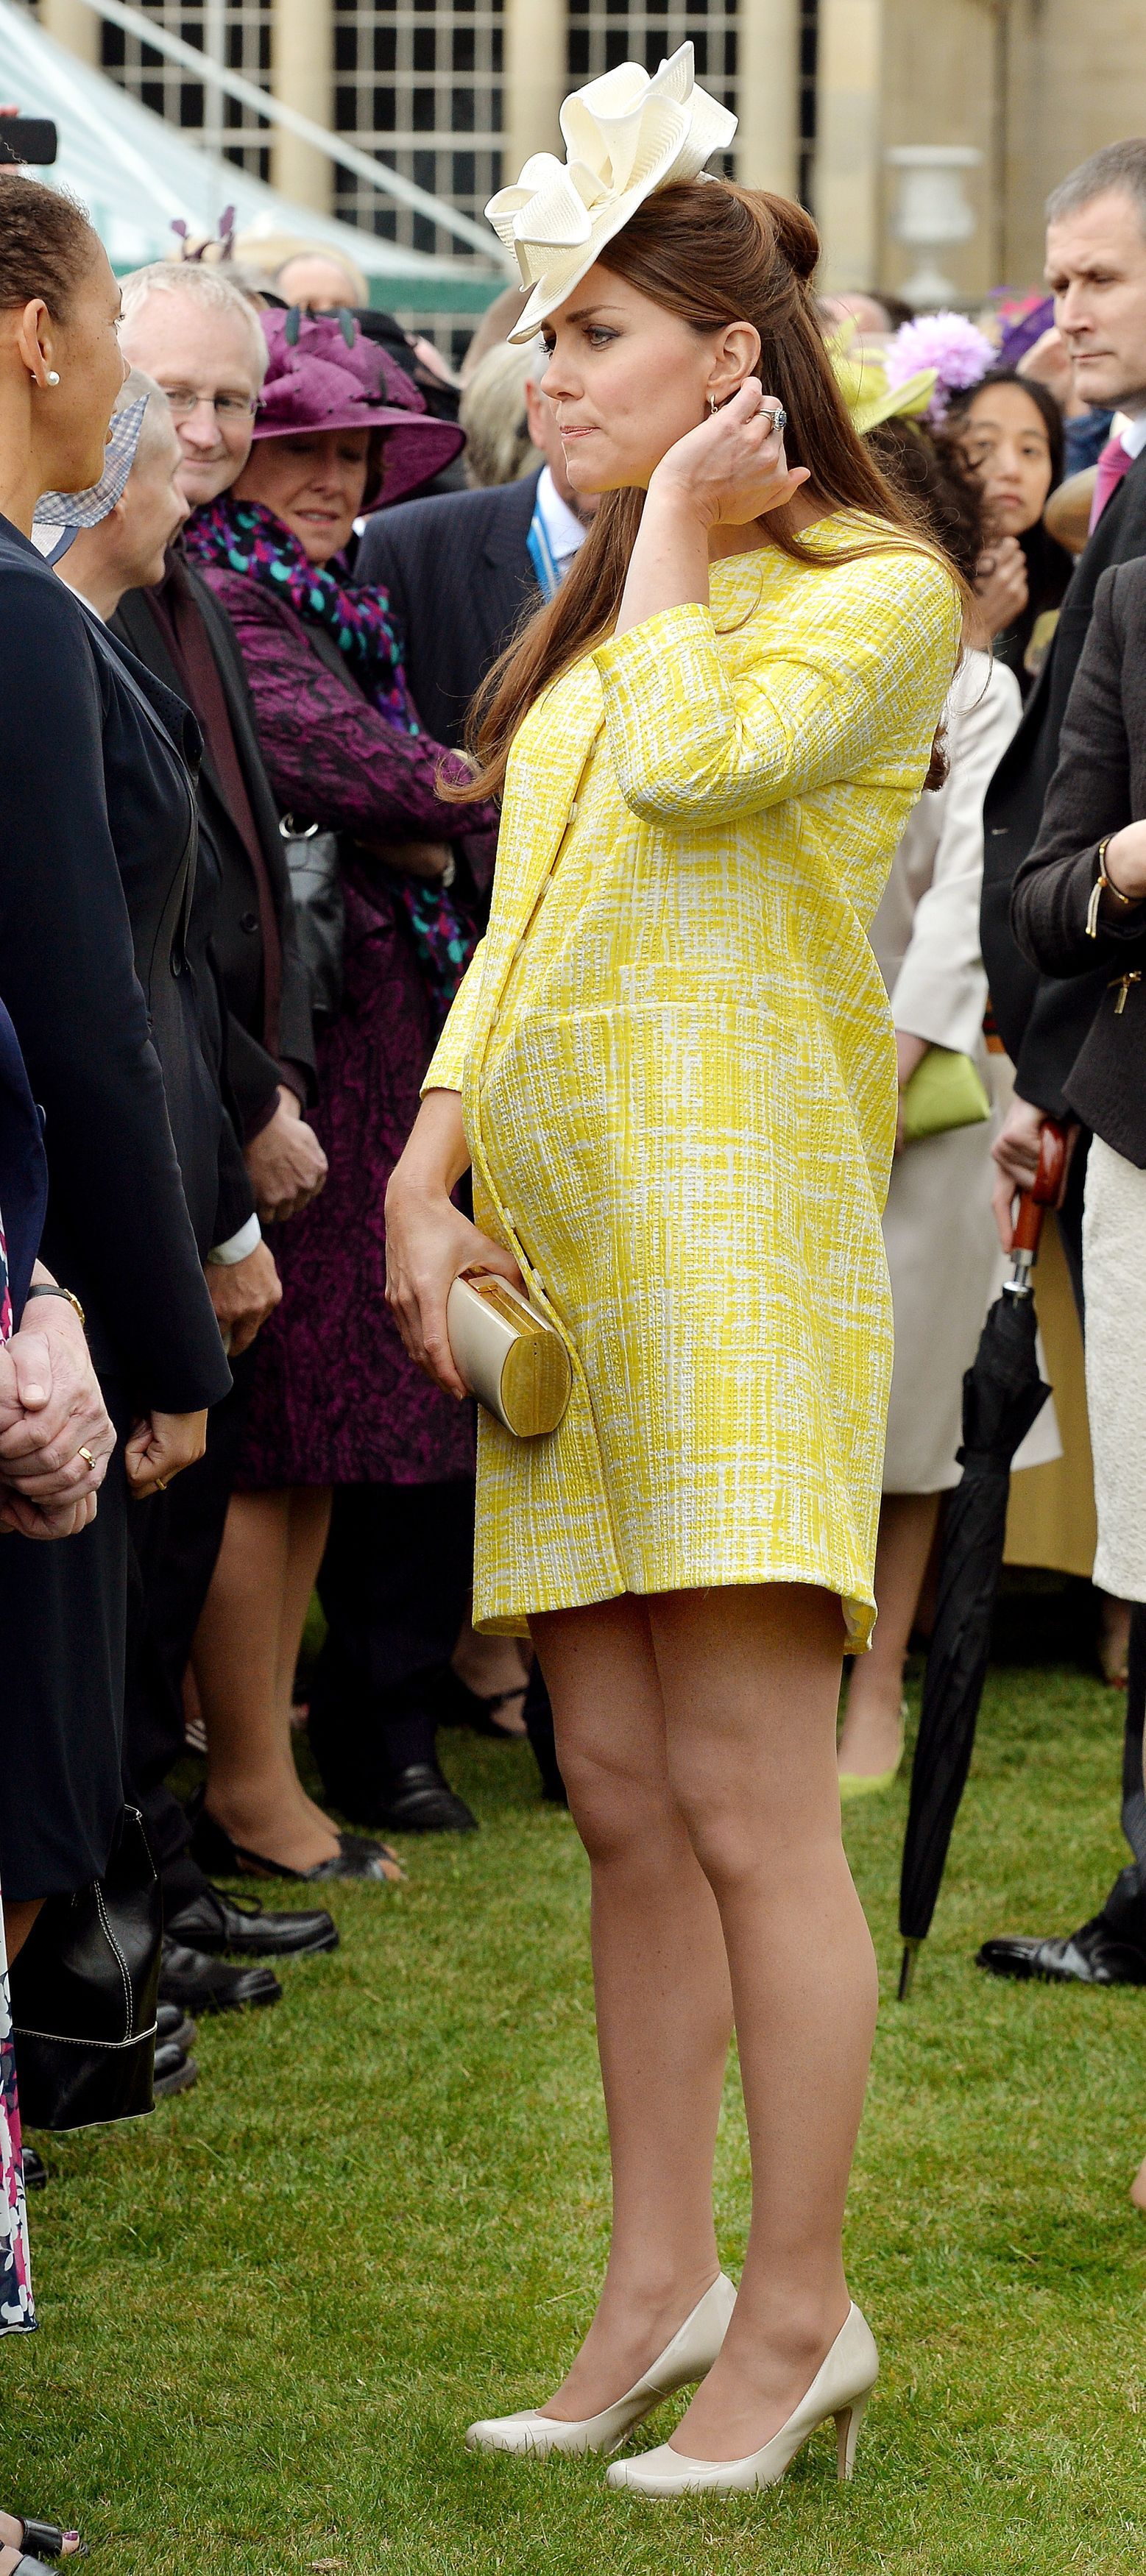 Duchess of Cambridge attends a Garden Party in the grounds of Buckingham Palace, hosted by Queen Elizabeth II on June 30, 2013 in London.